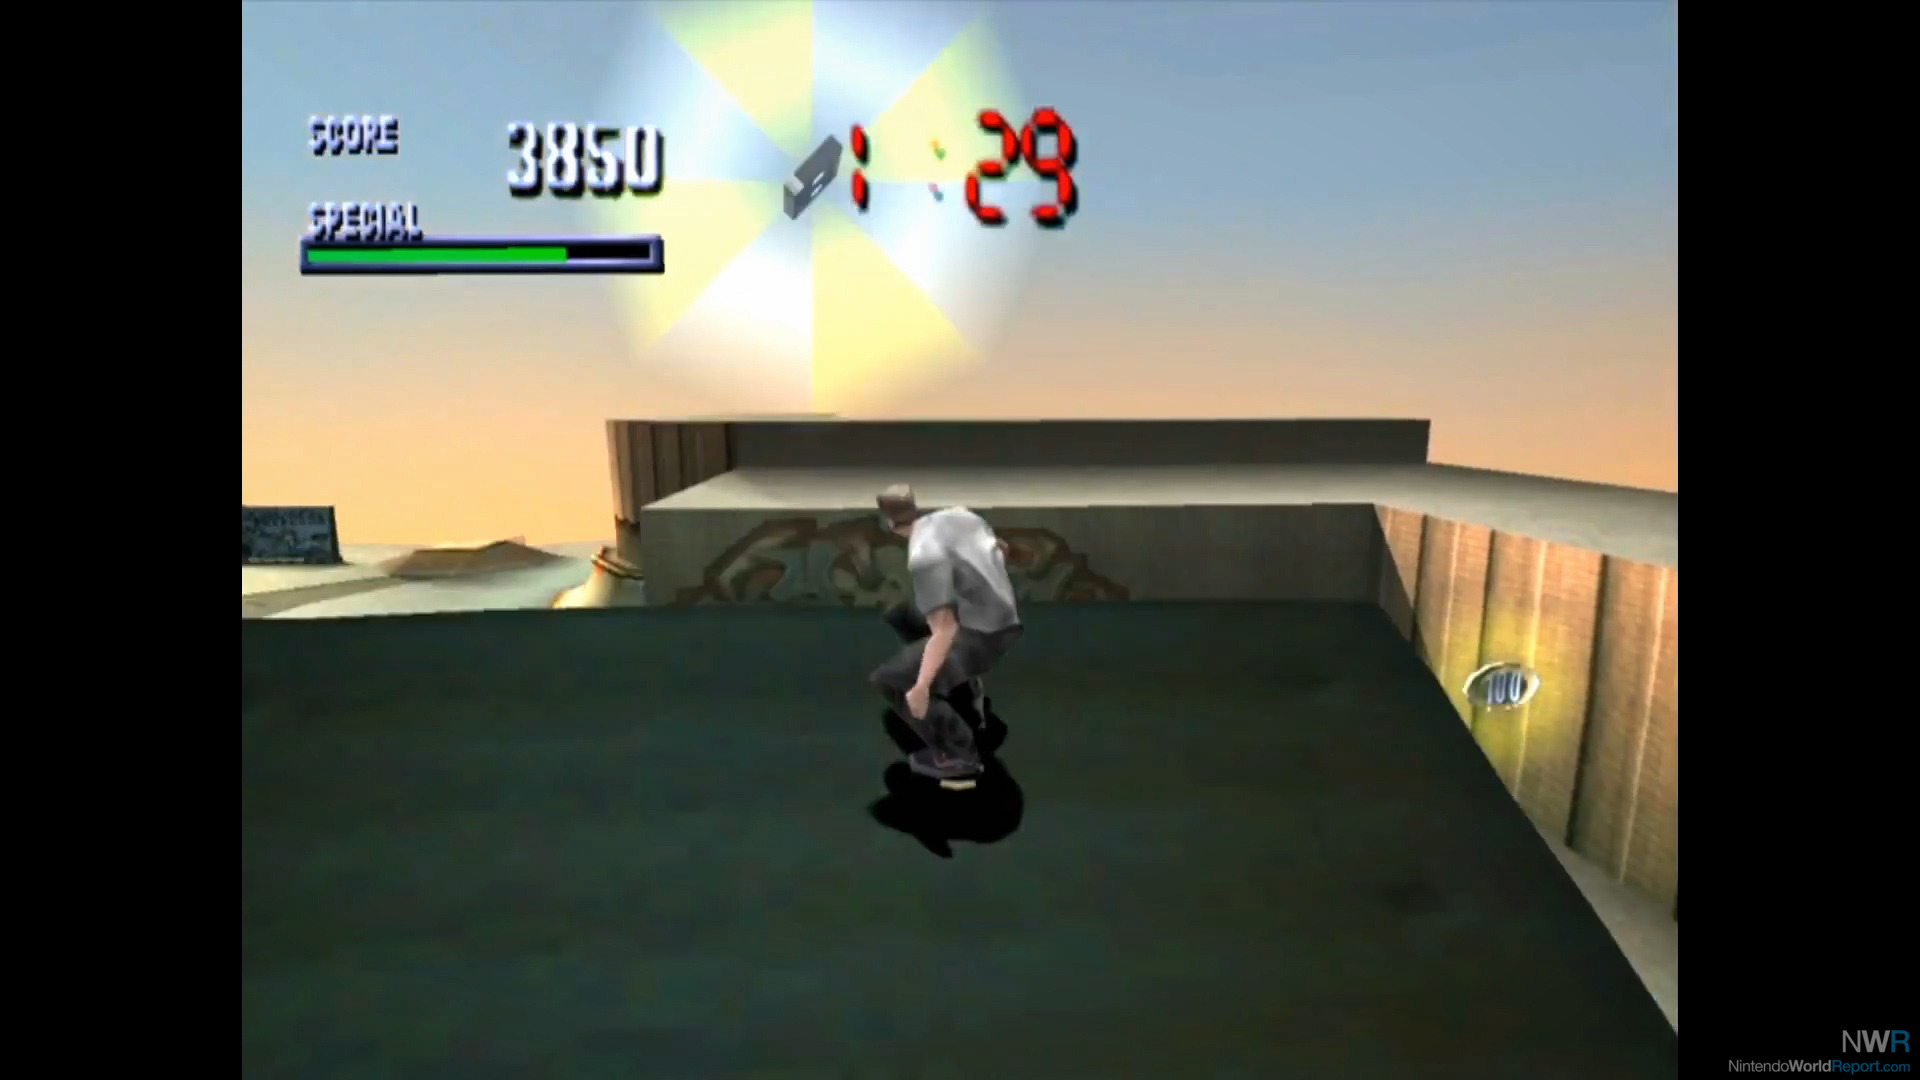 Pretending I'm a Superman: The Tony Hawk Video Game Story Review - The  Koalition